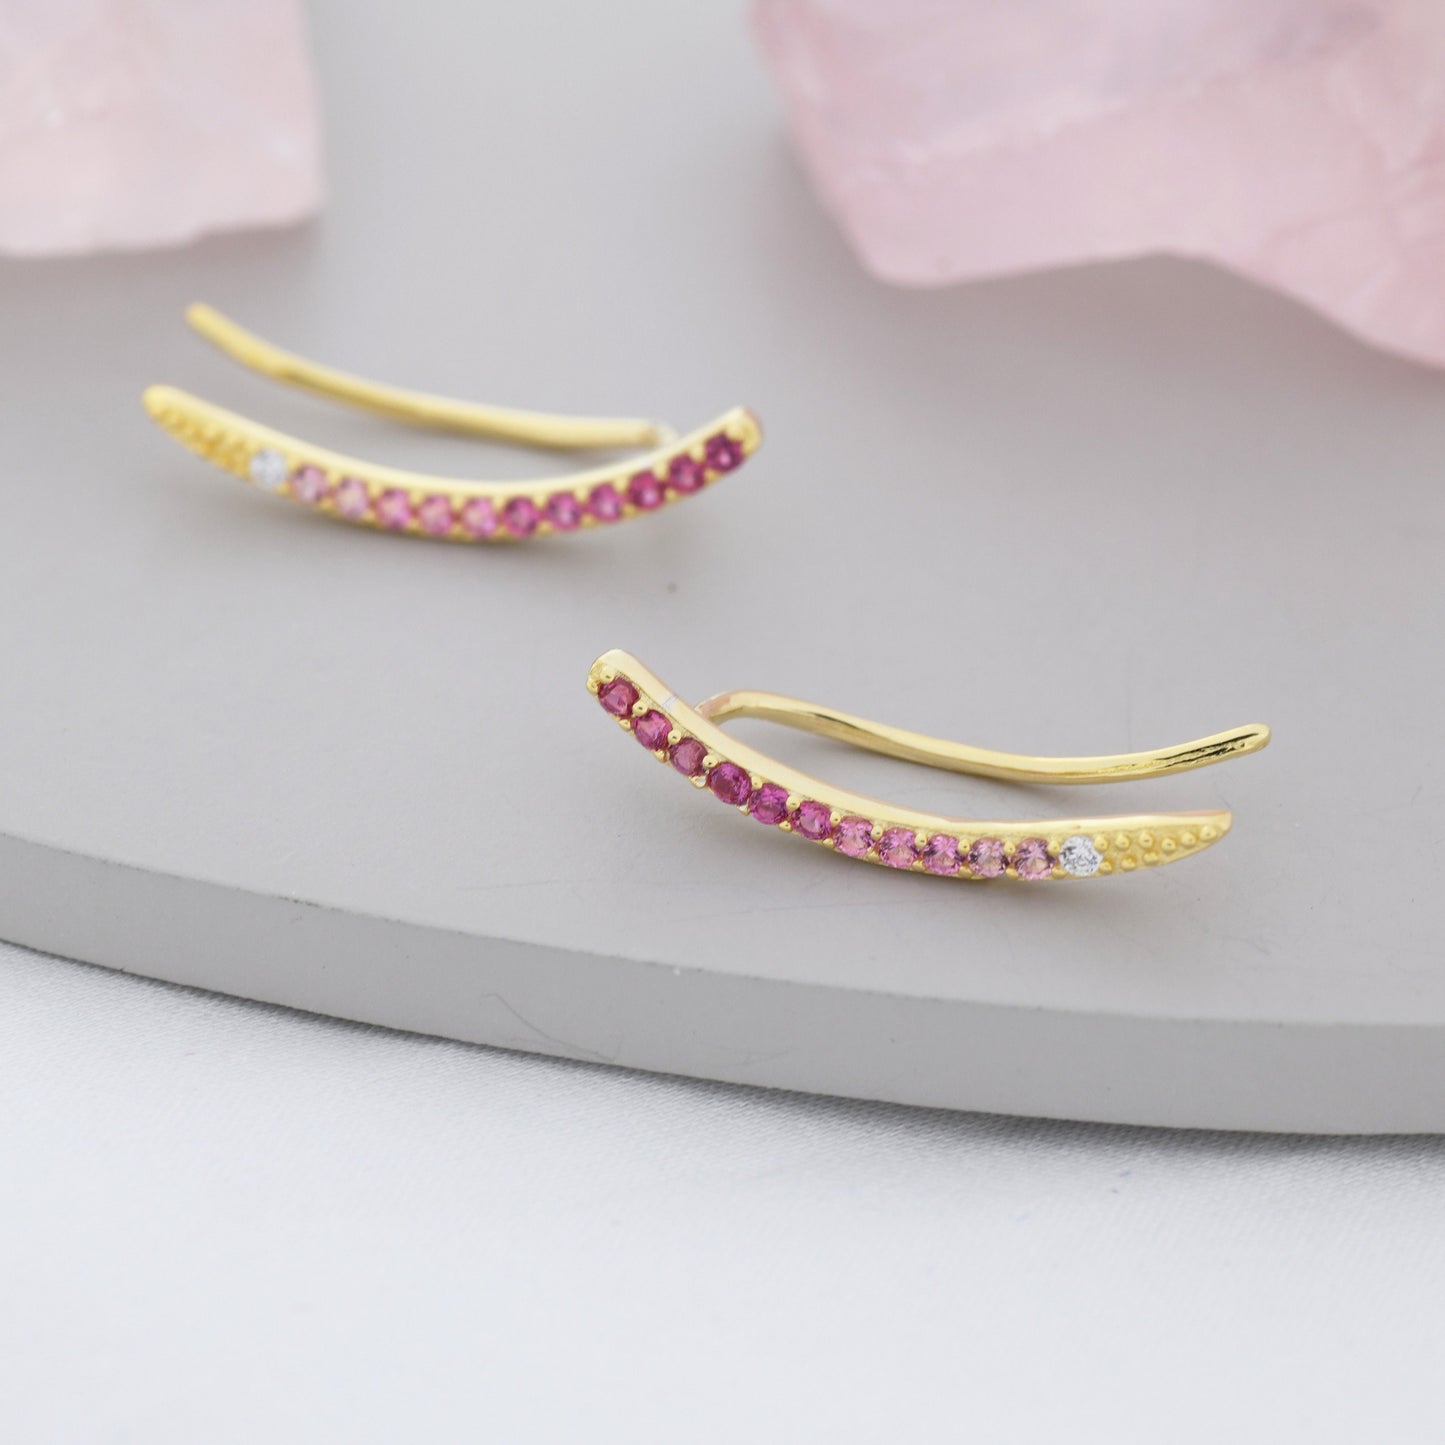 Ombre Ruby Pink CZ Crawler Earrings in Sterling Silver, Silver or Gold, Gradient Colour Ear Crawlers, July Birthstone Ear Climbers